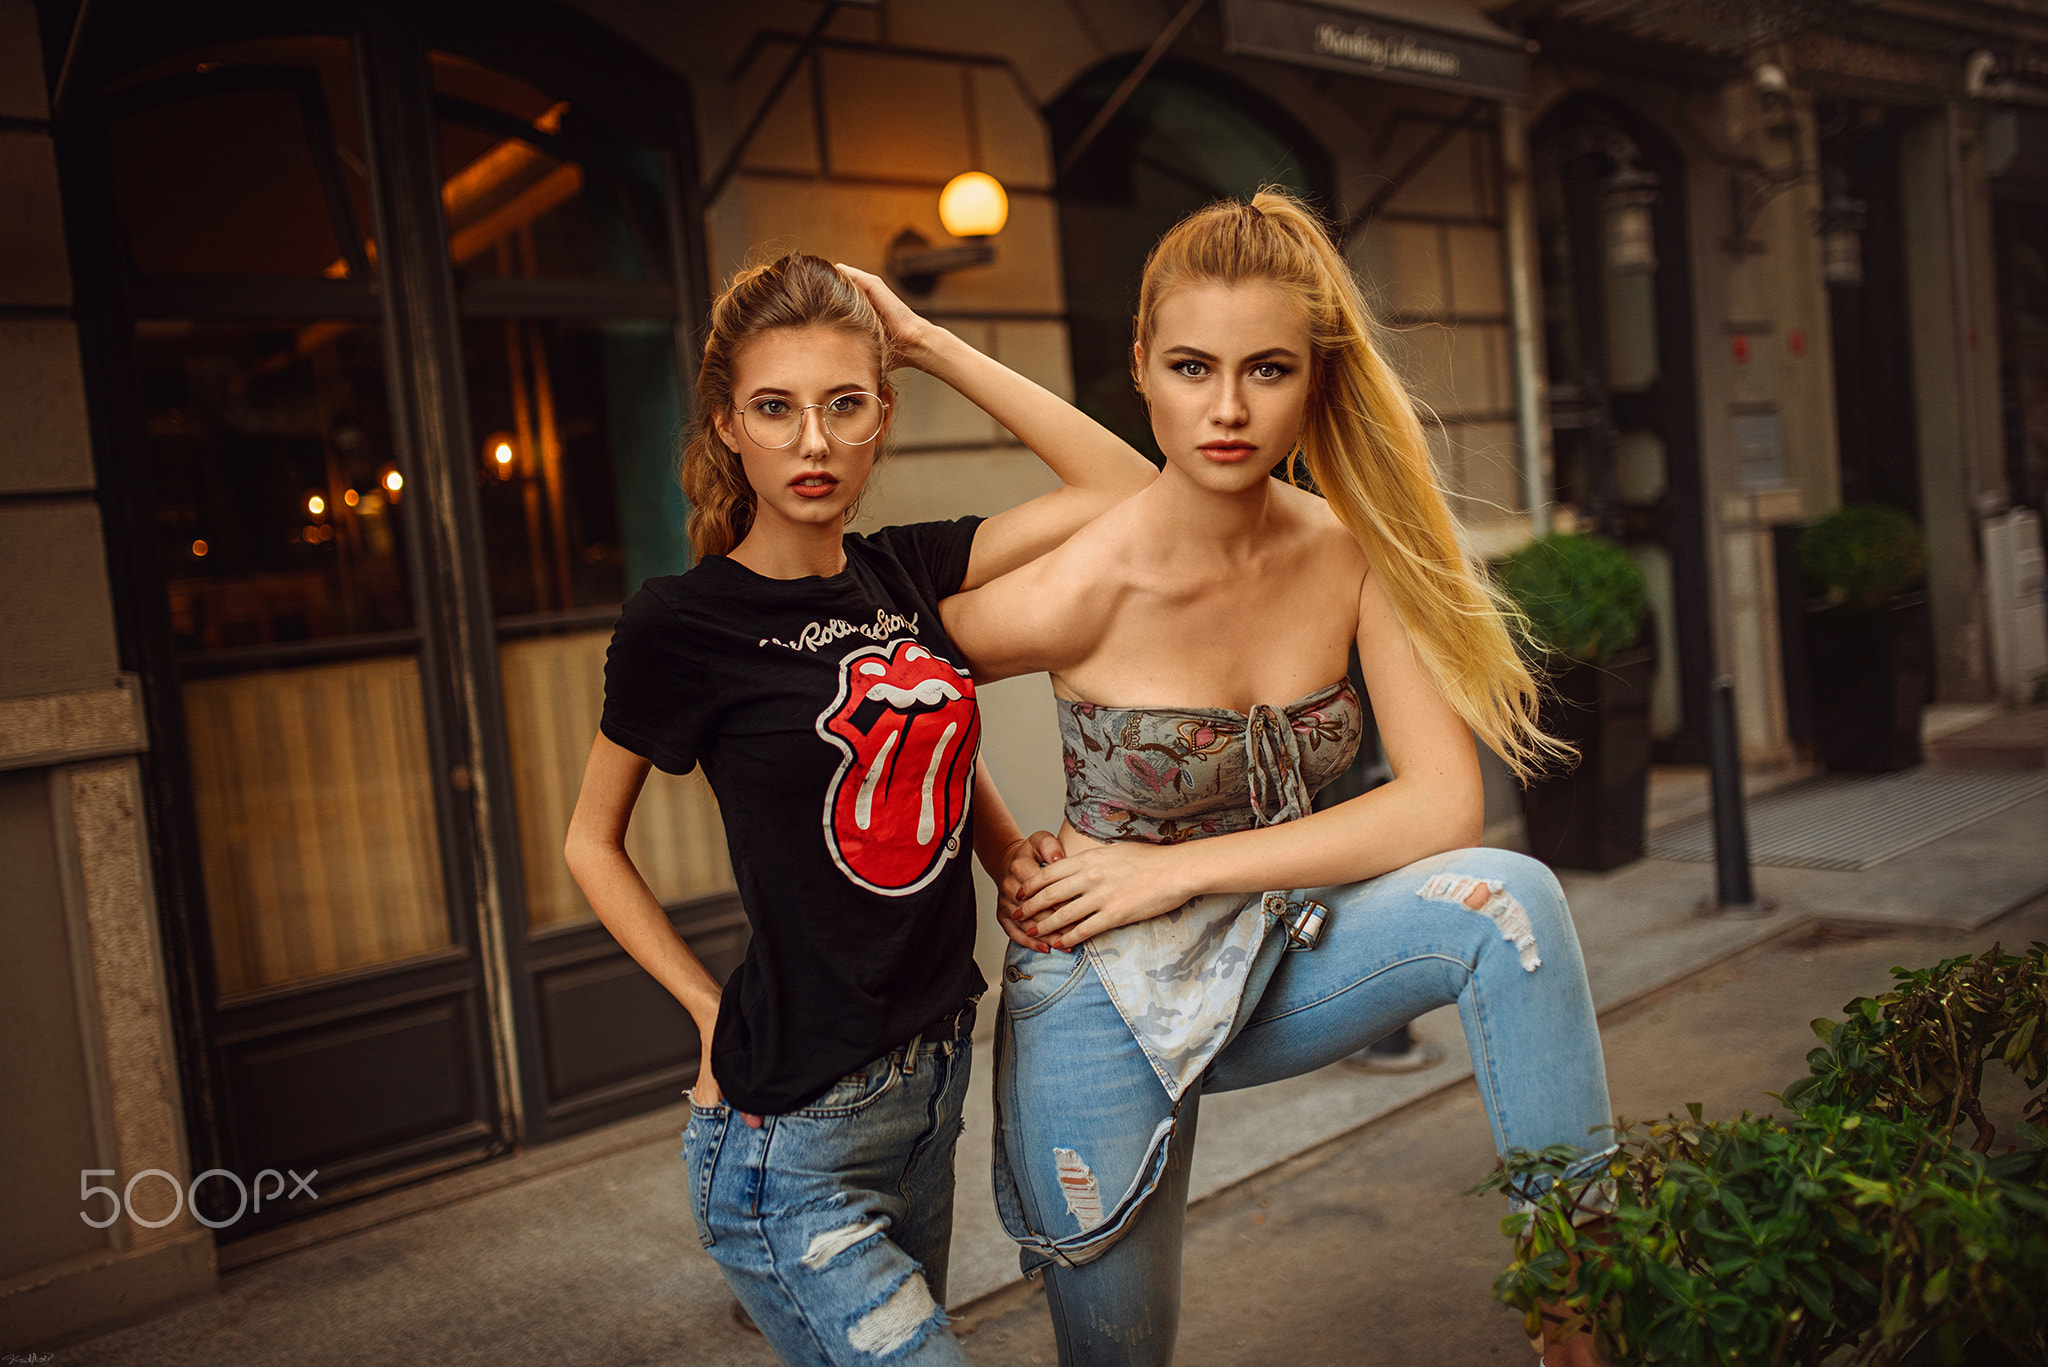 People 2048x1367 women blonde portrait overalls torn jeans T-shirt women outdoors Rolling Stones 500px watermarked rolling stones t-shirt two women model long hair urban women with glasses tube top skinny